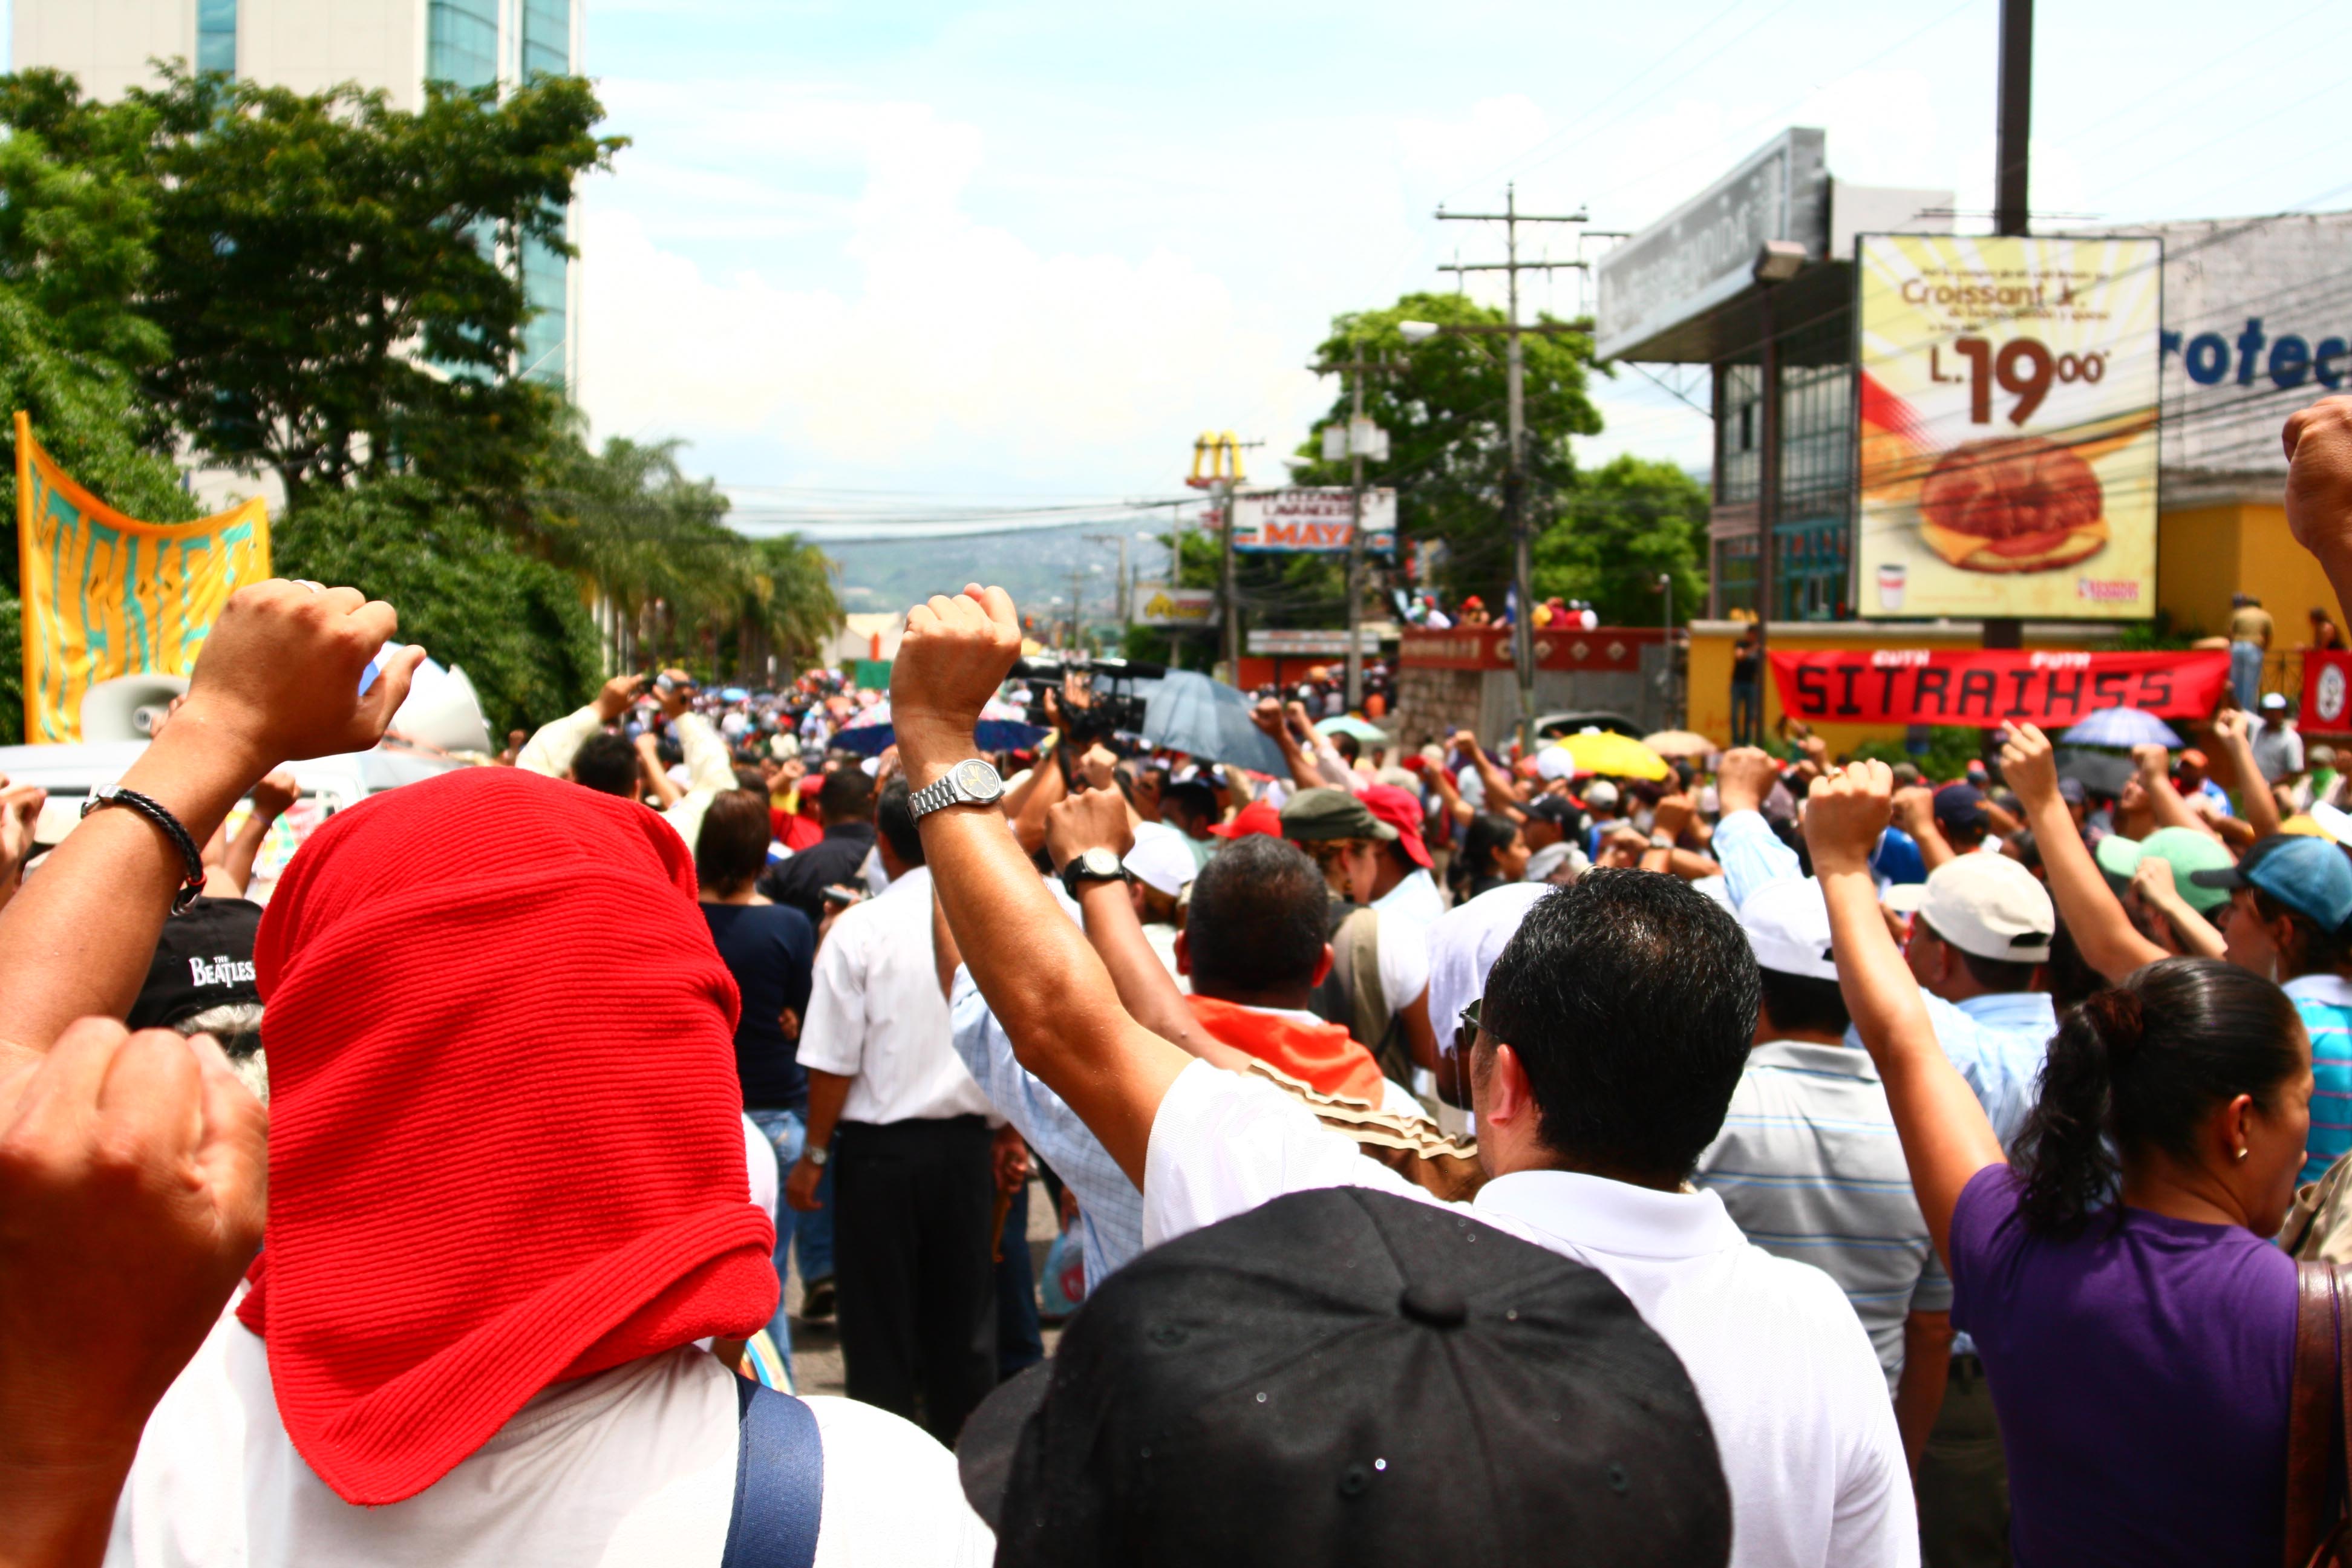 Protesters in Honduras filing the streets calling for president's resignation